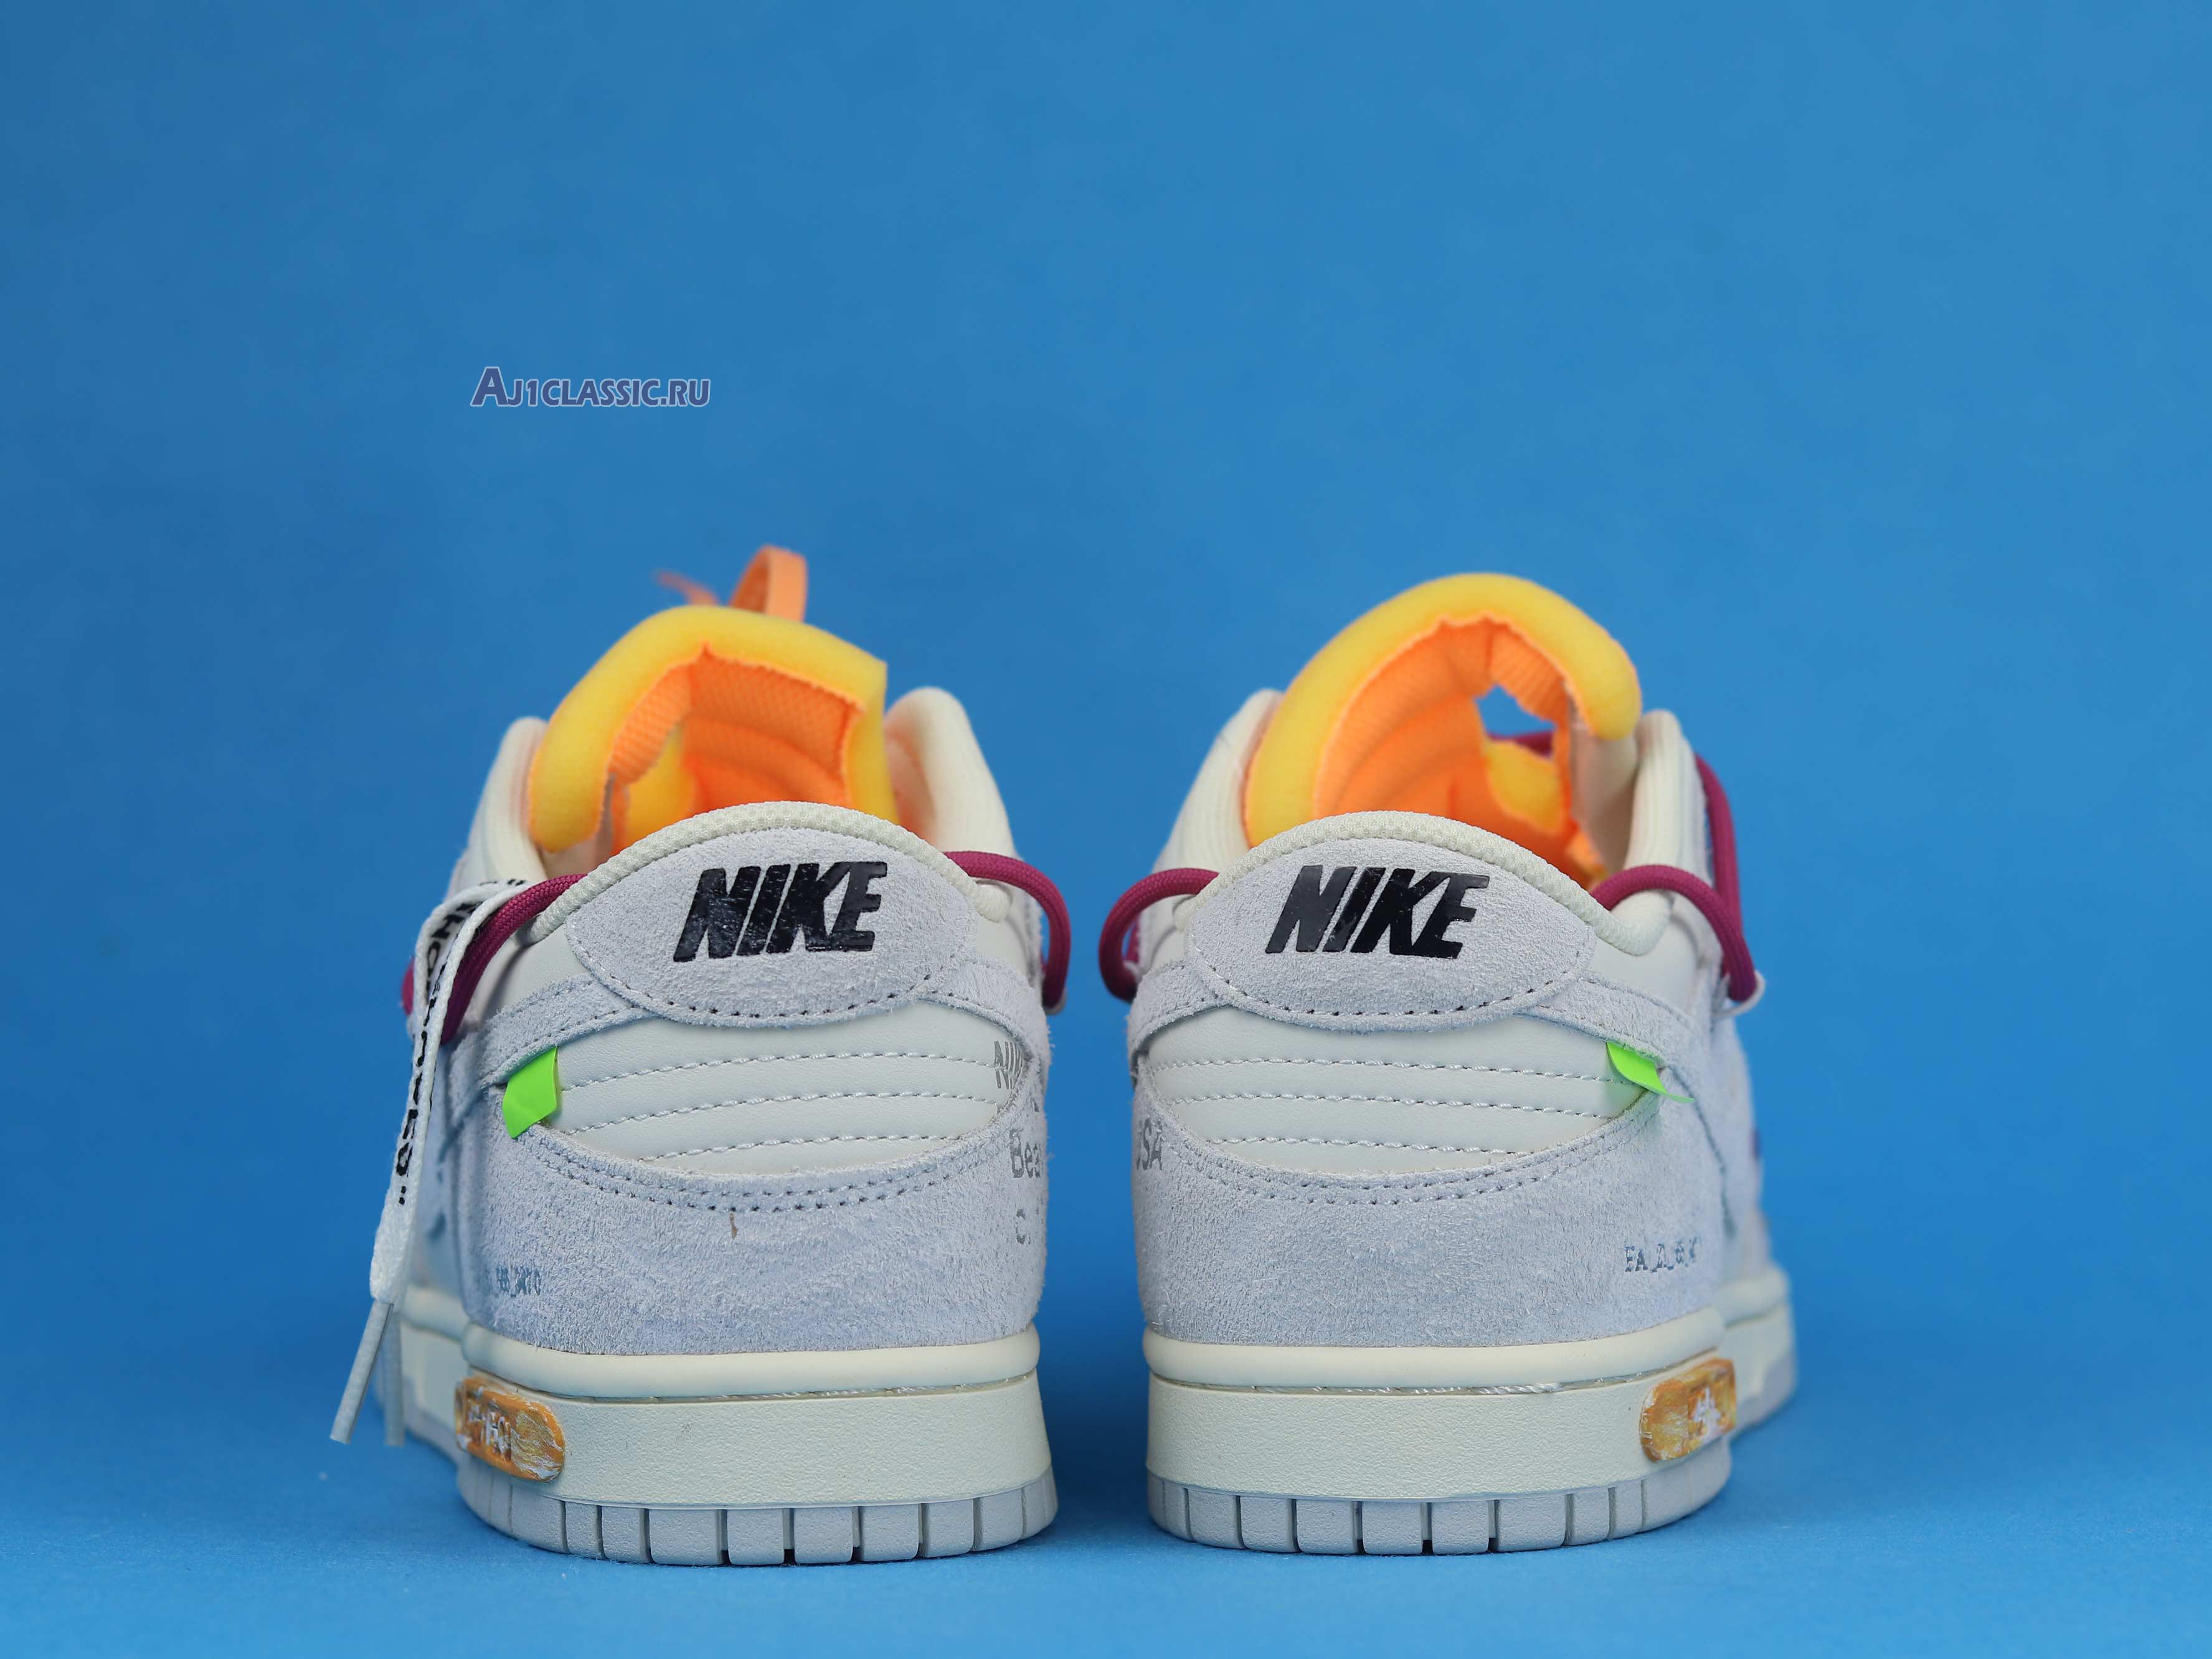 Off-White x Nike Dunk Low "Lot 35 of 50" DJ0950-114